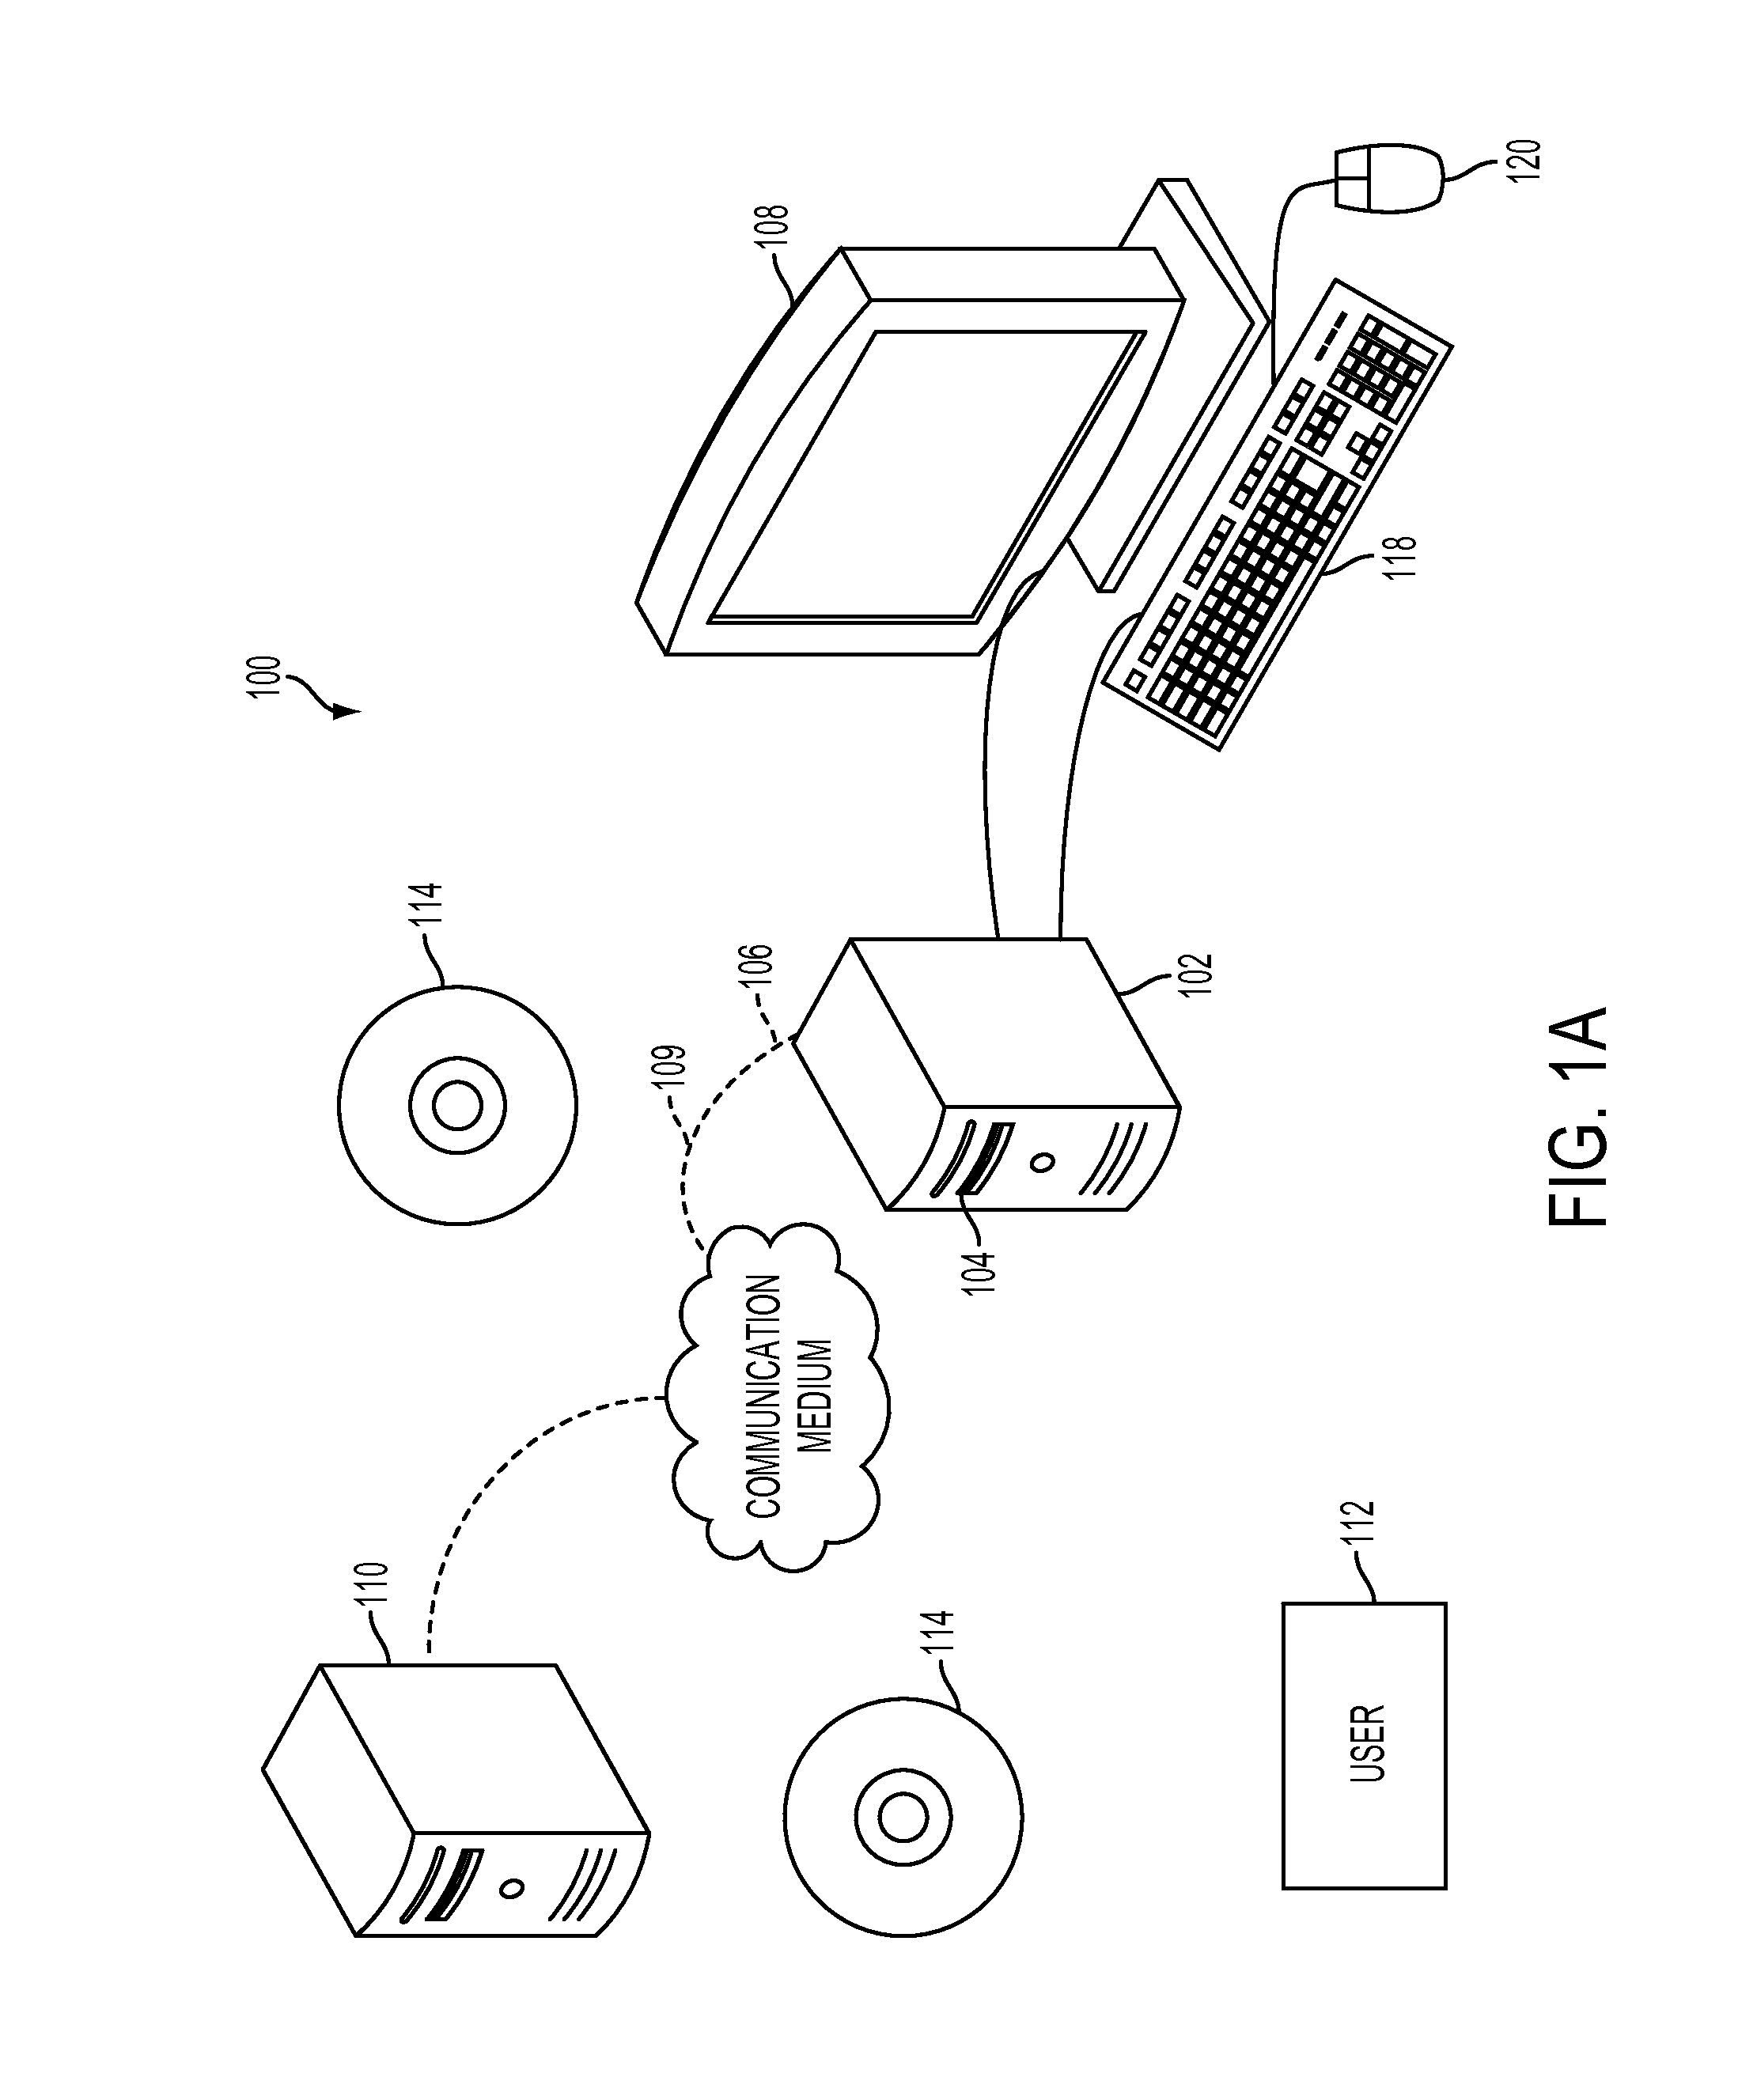 Systems, methods and kits for measuring cough and respiratory rate using an accelerometer